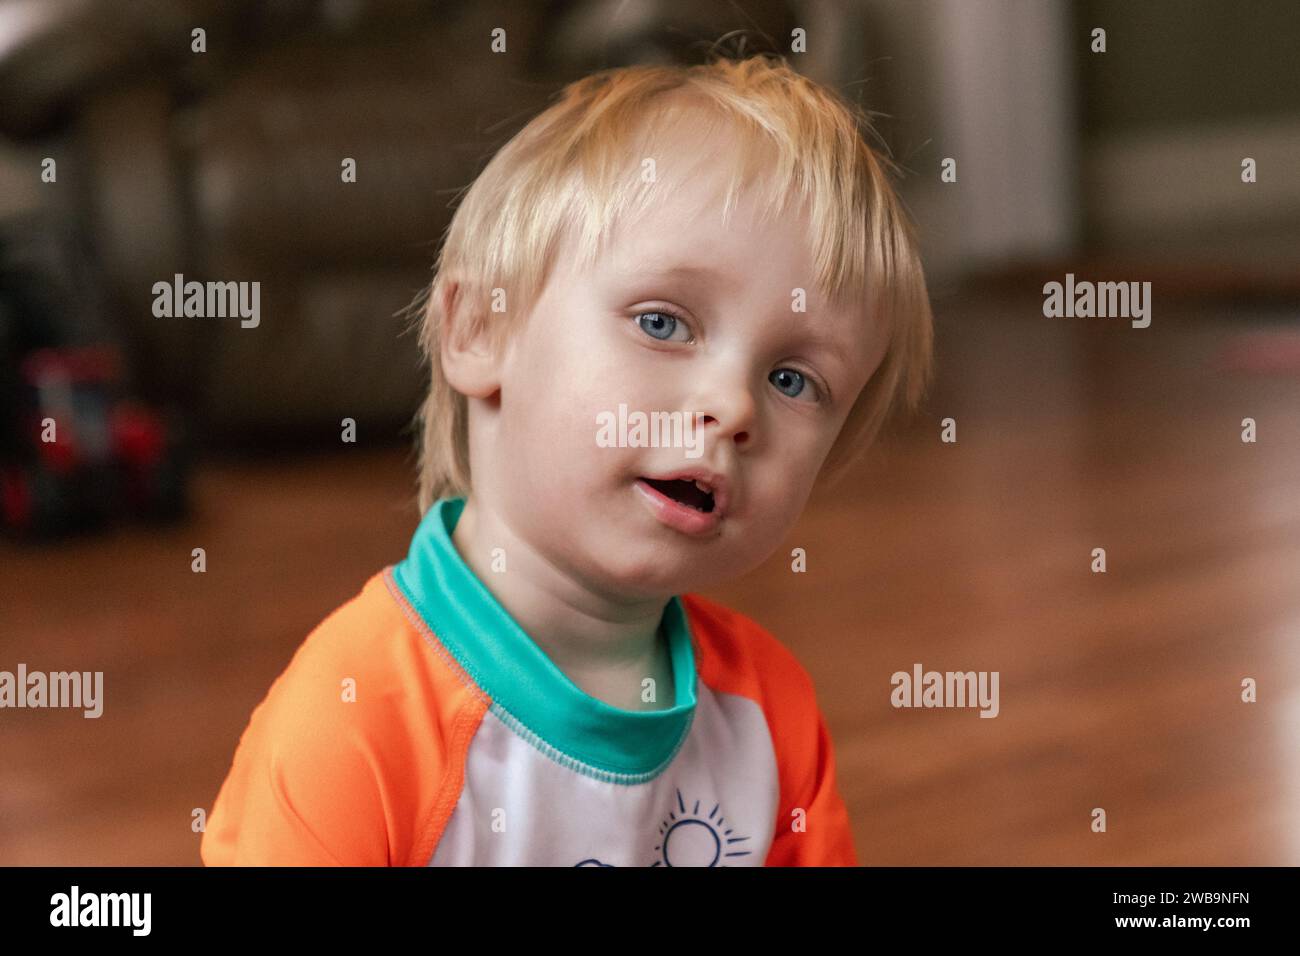 Portrait of a blond-haired, blue-eyed, curious and impish toddler. Stock Photo